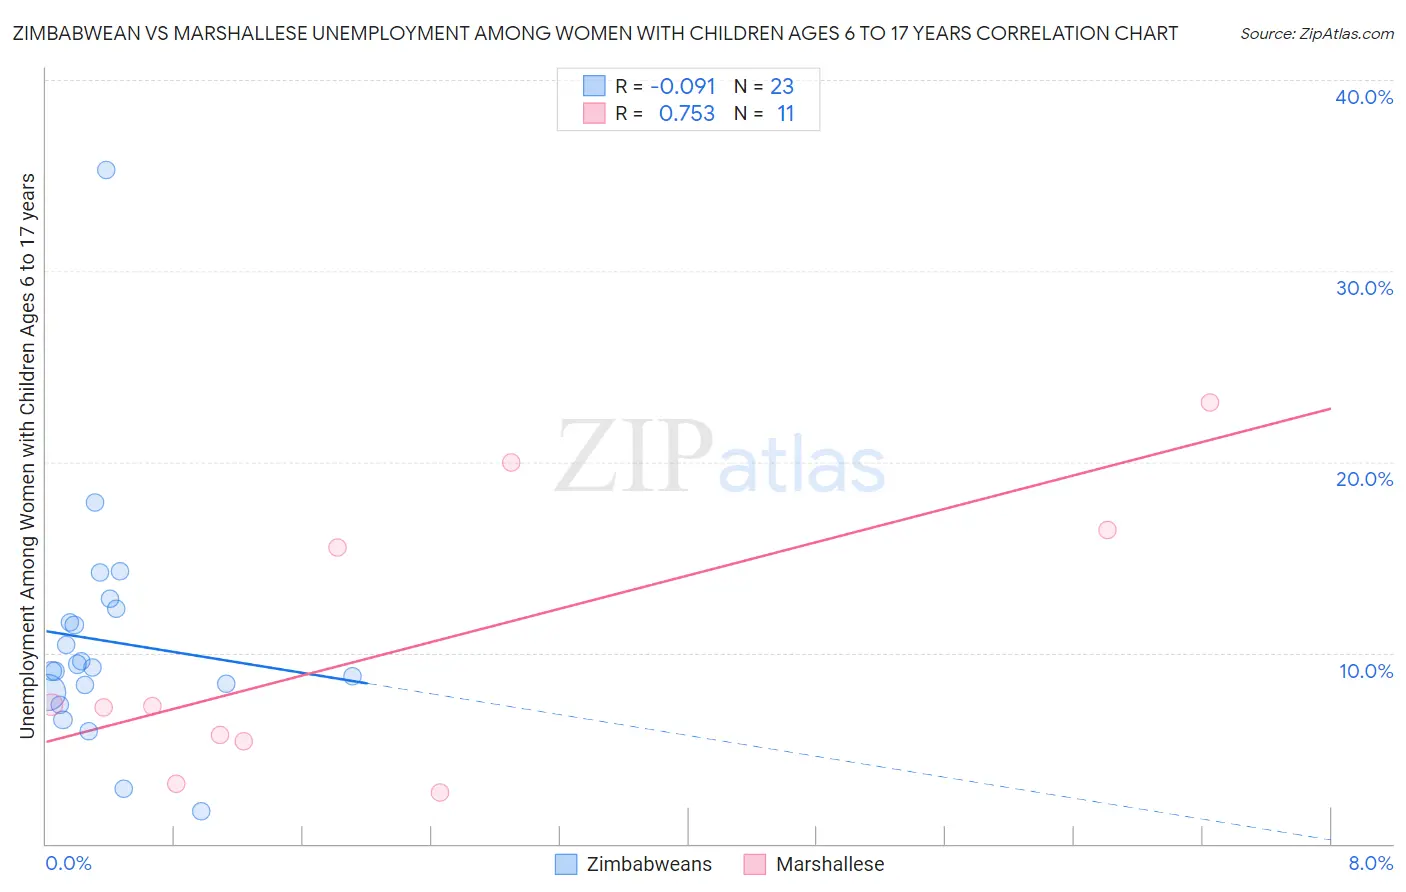 Zimbabwean vs Marshallese Unemployment Among Women with Children Ages 6 to 17 years